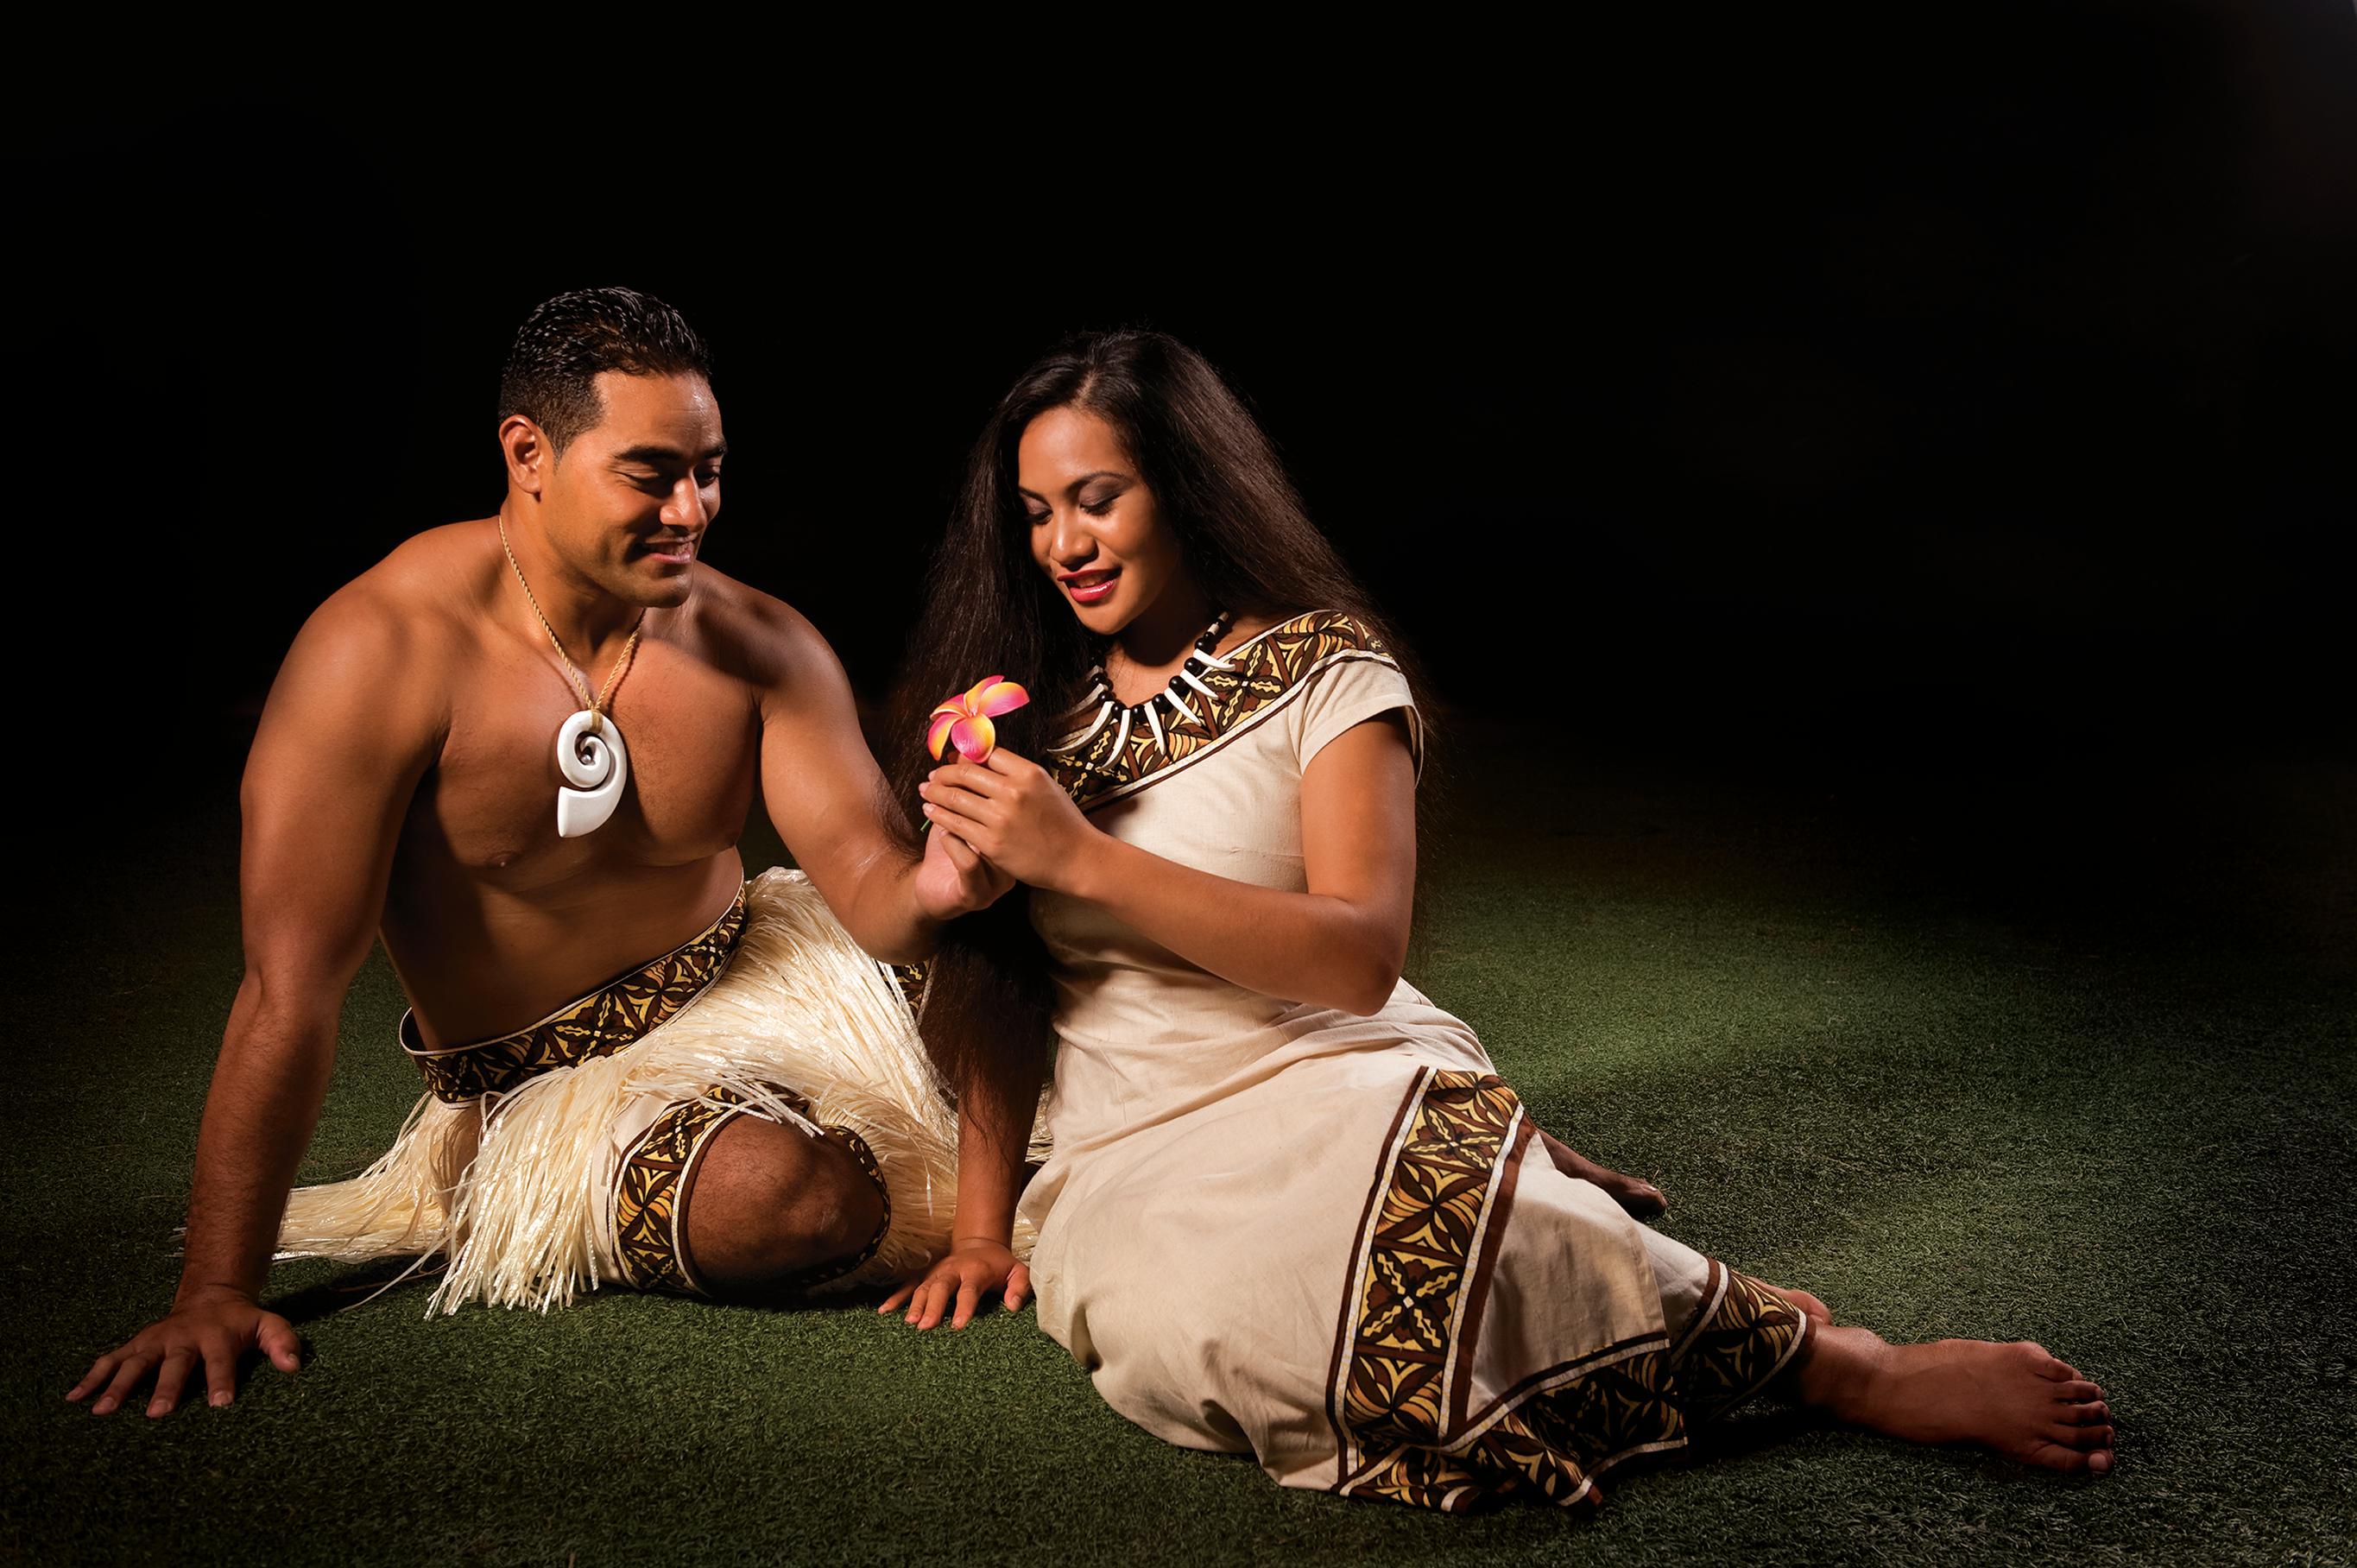 photo of Mana and his dearest love Lani, the stars of the Ha:breath of life show at the Polynesian Cultural Center, Laie, Oahu.